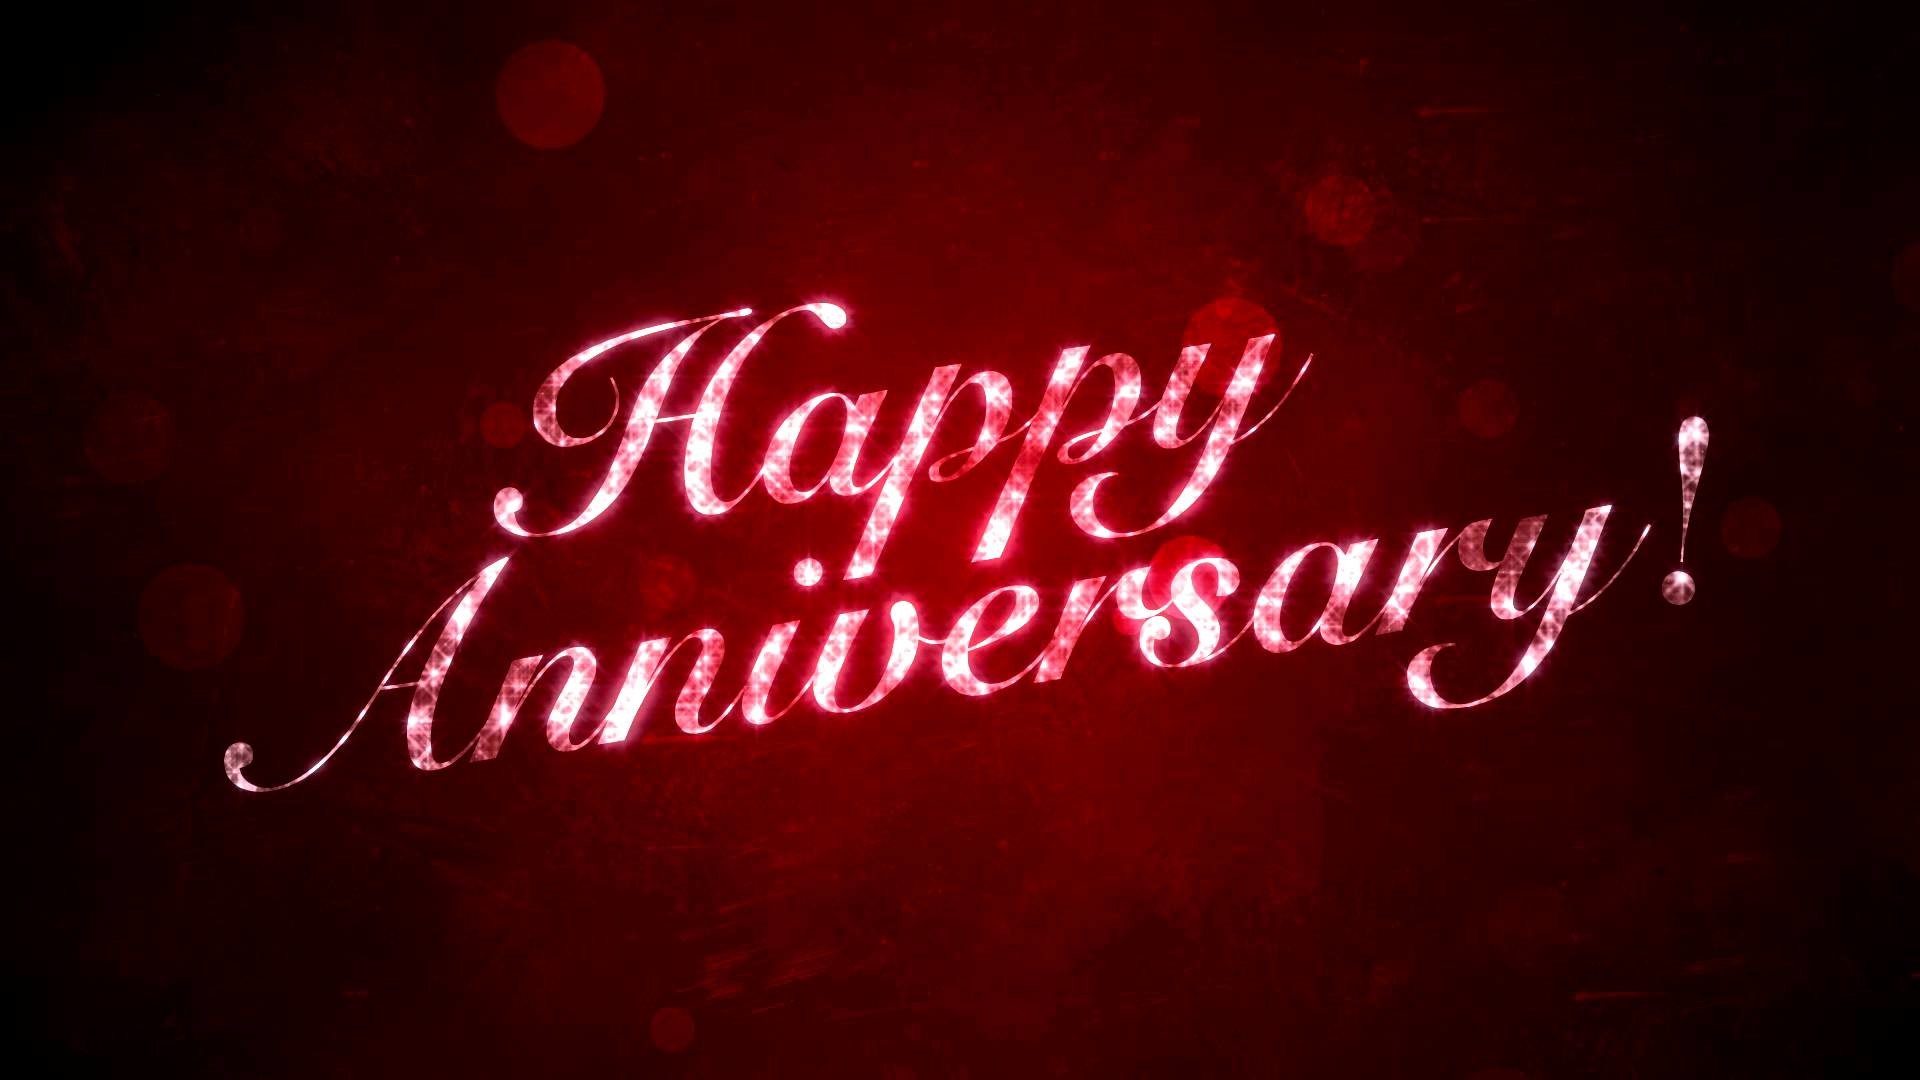 1920x1080 ... 5th wedding anniversary wallpaper happy anniversary backgrounds  wallpaper cave ...